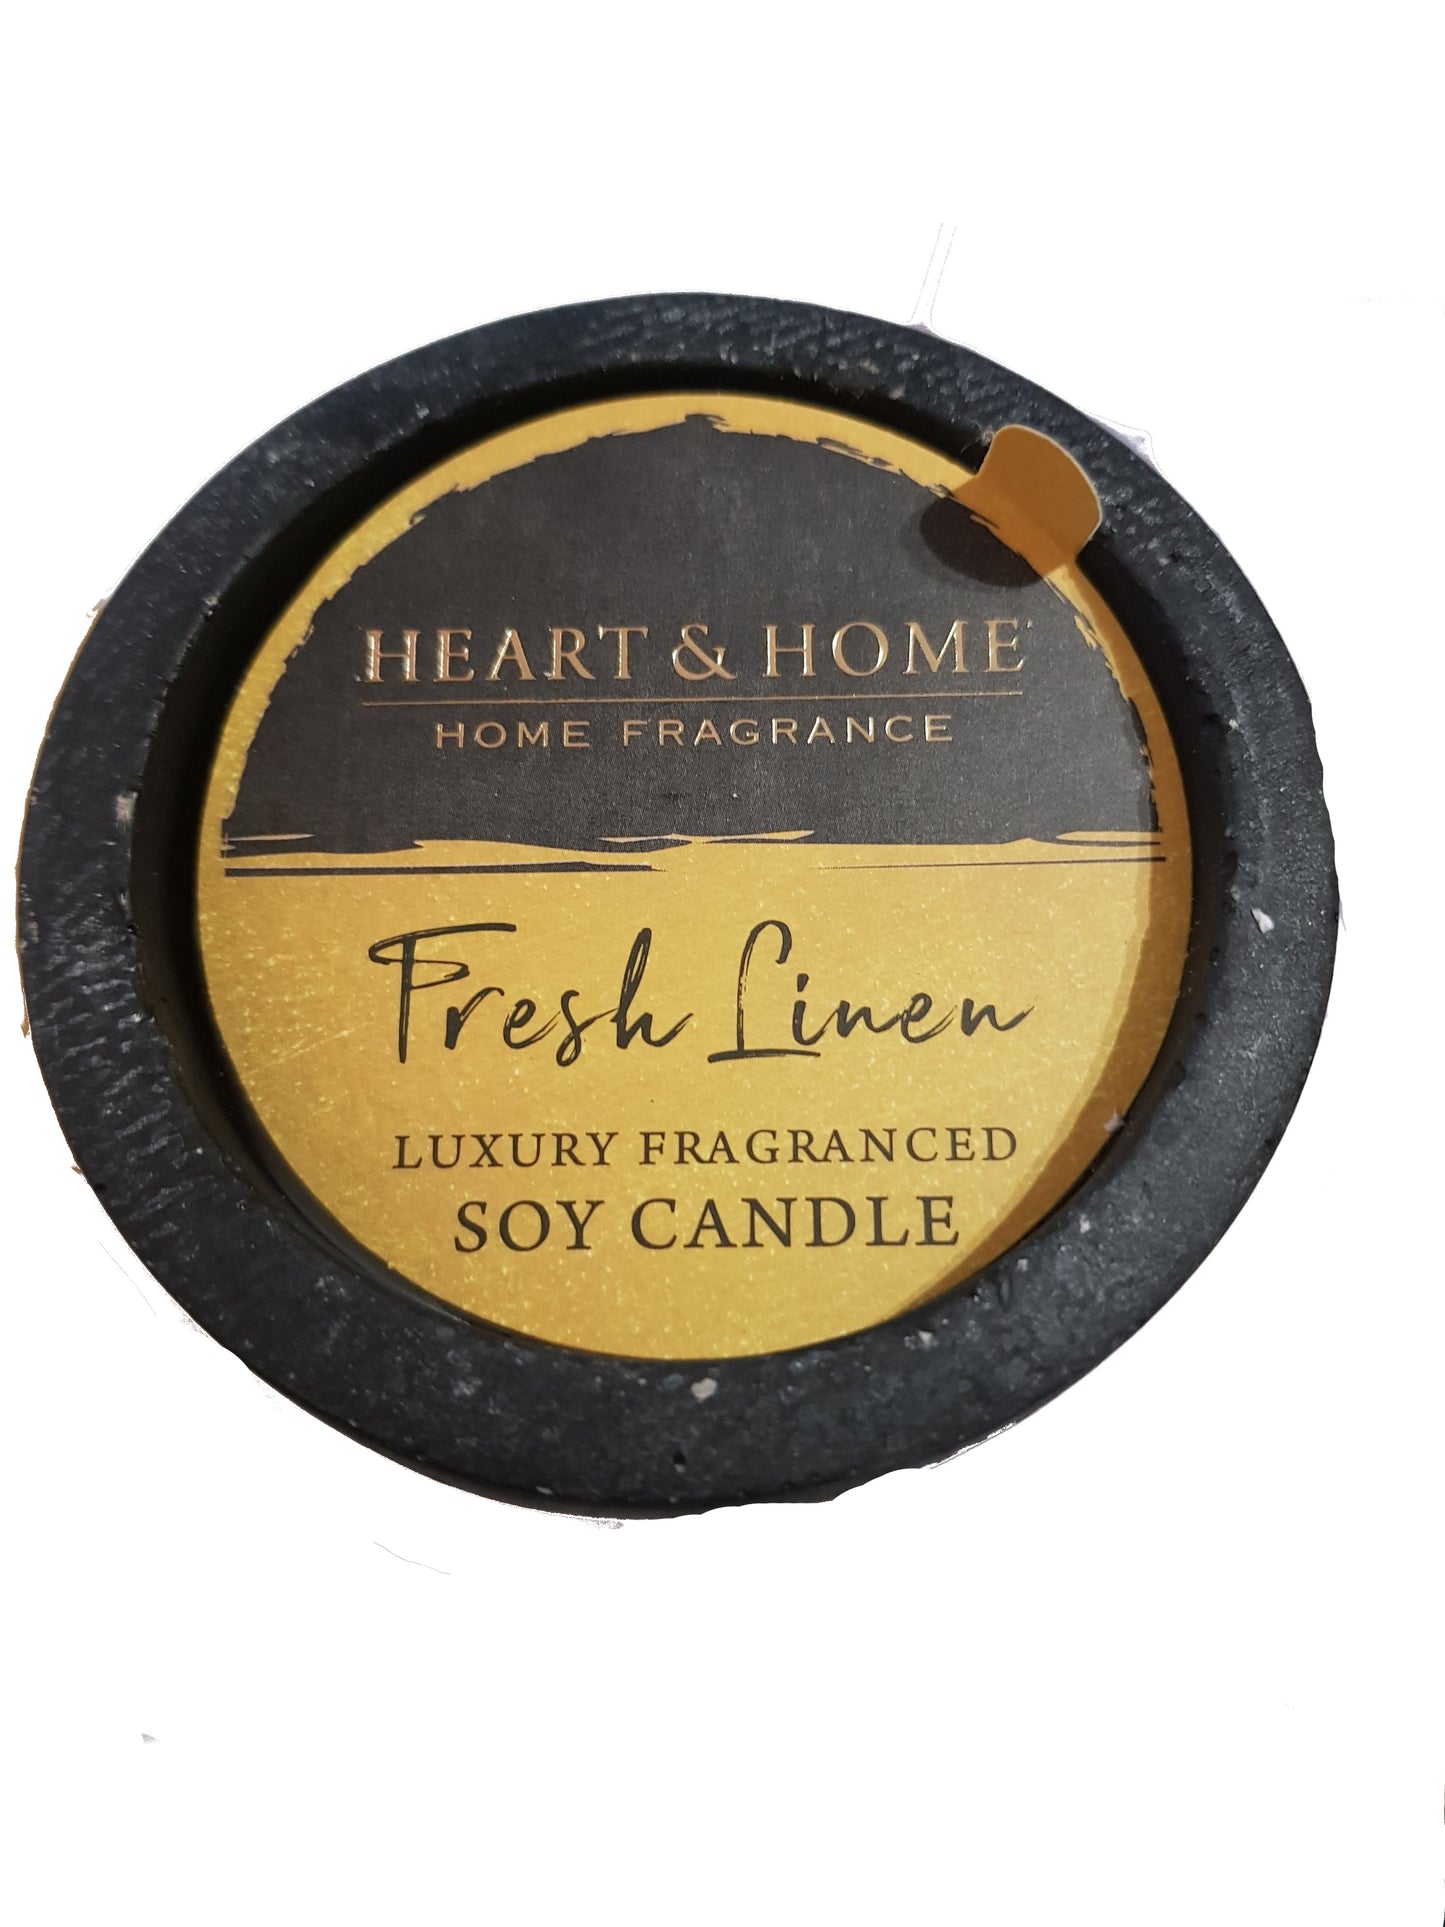 Fresh Linen Luxury Fragranced Soy Candle From Heart & Home Artisan Collection.